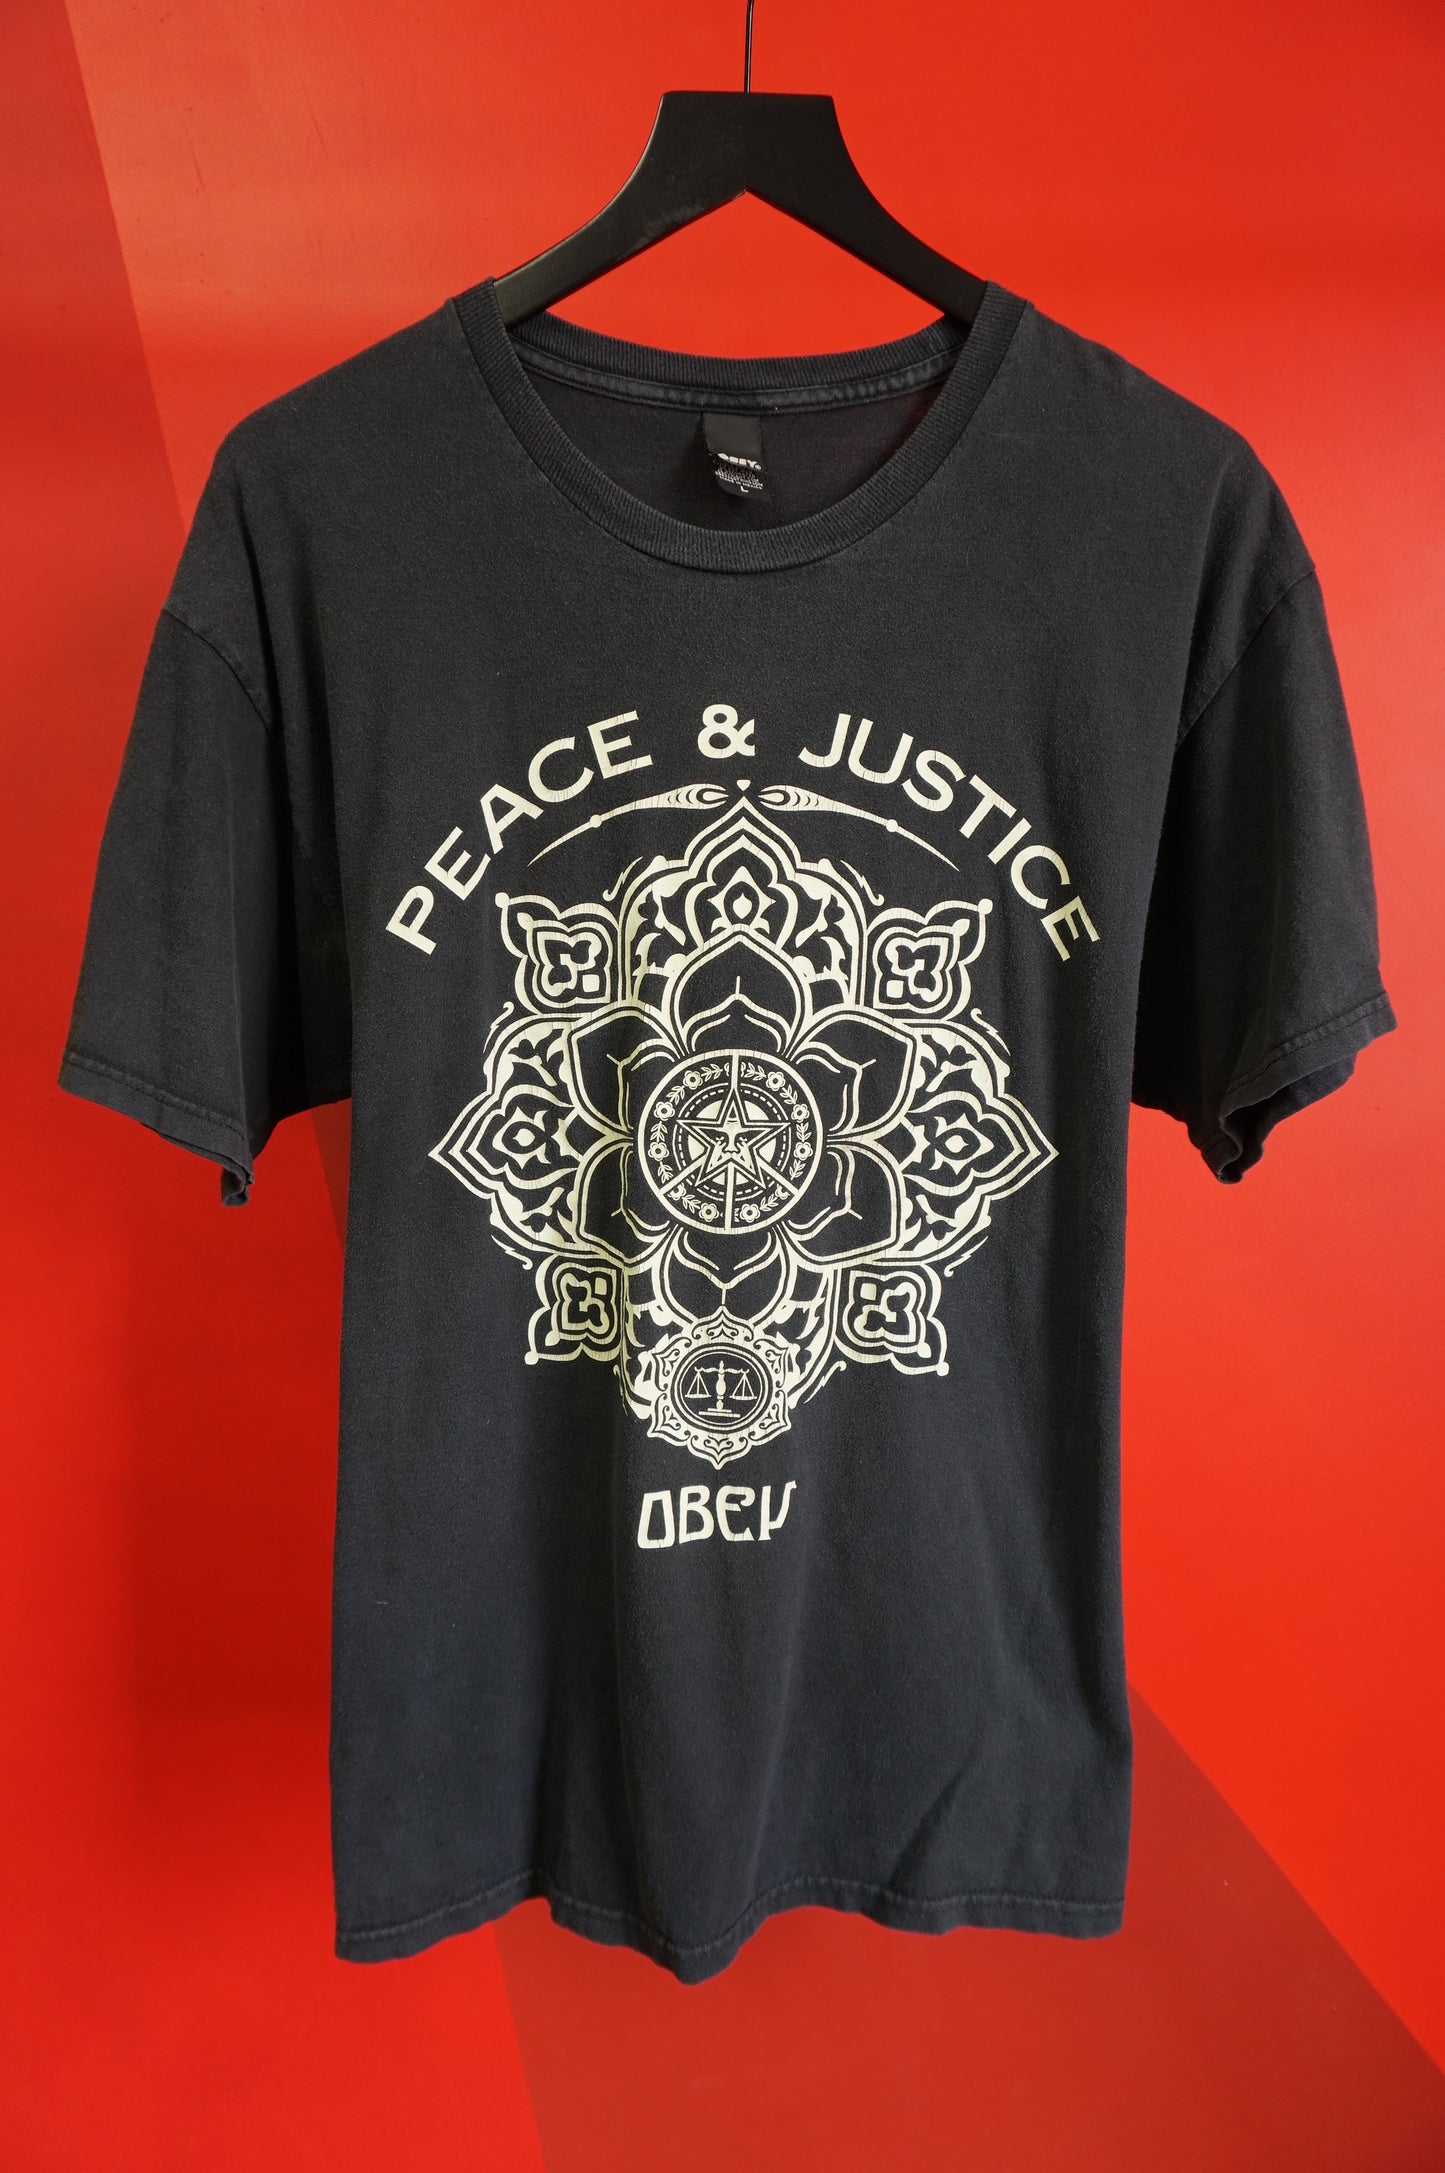 (L) Obey Peace & Justice T-Shirt